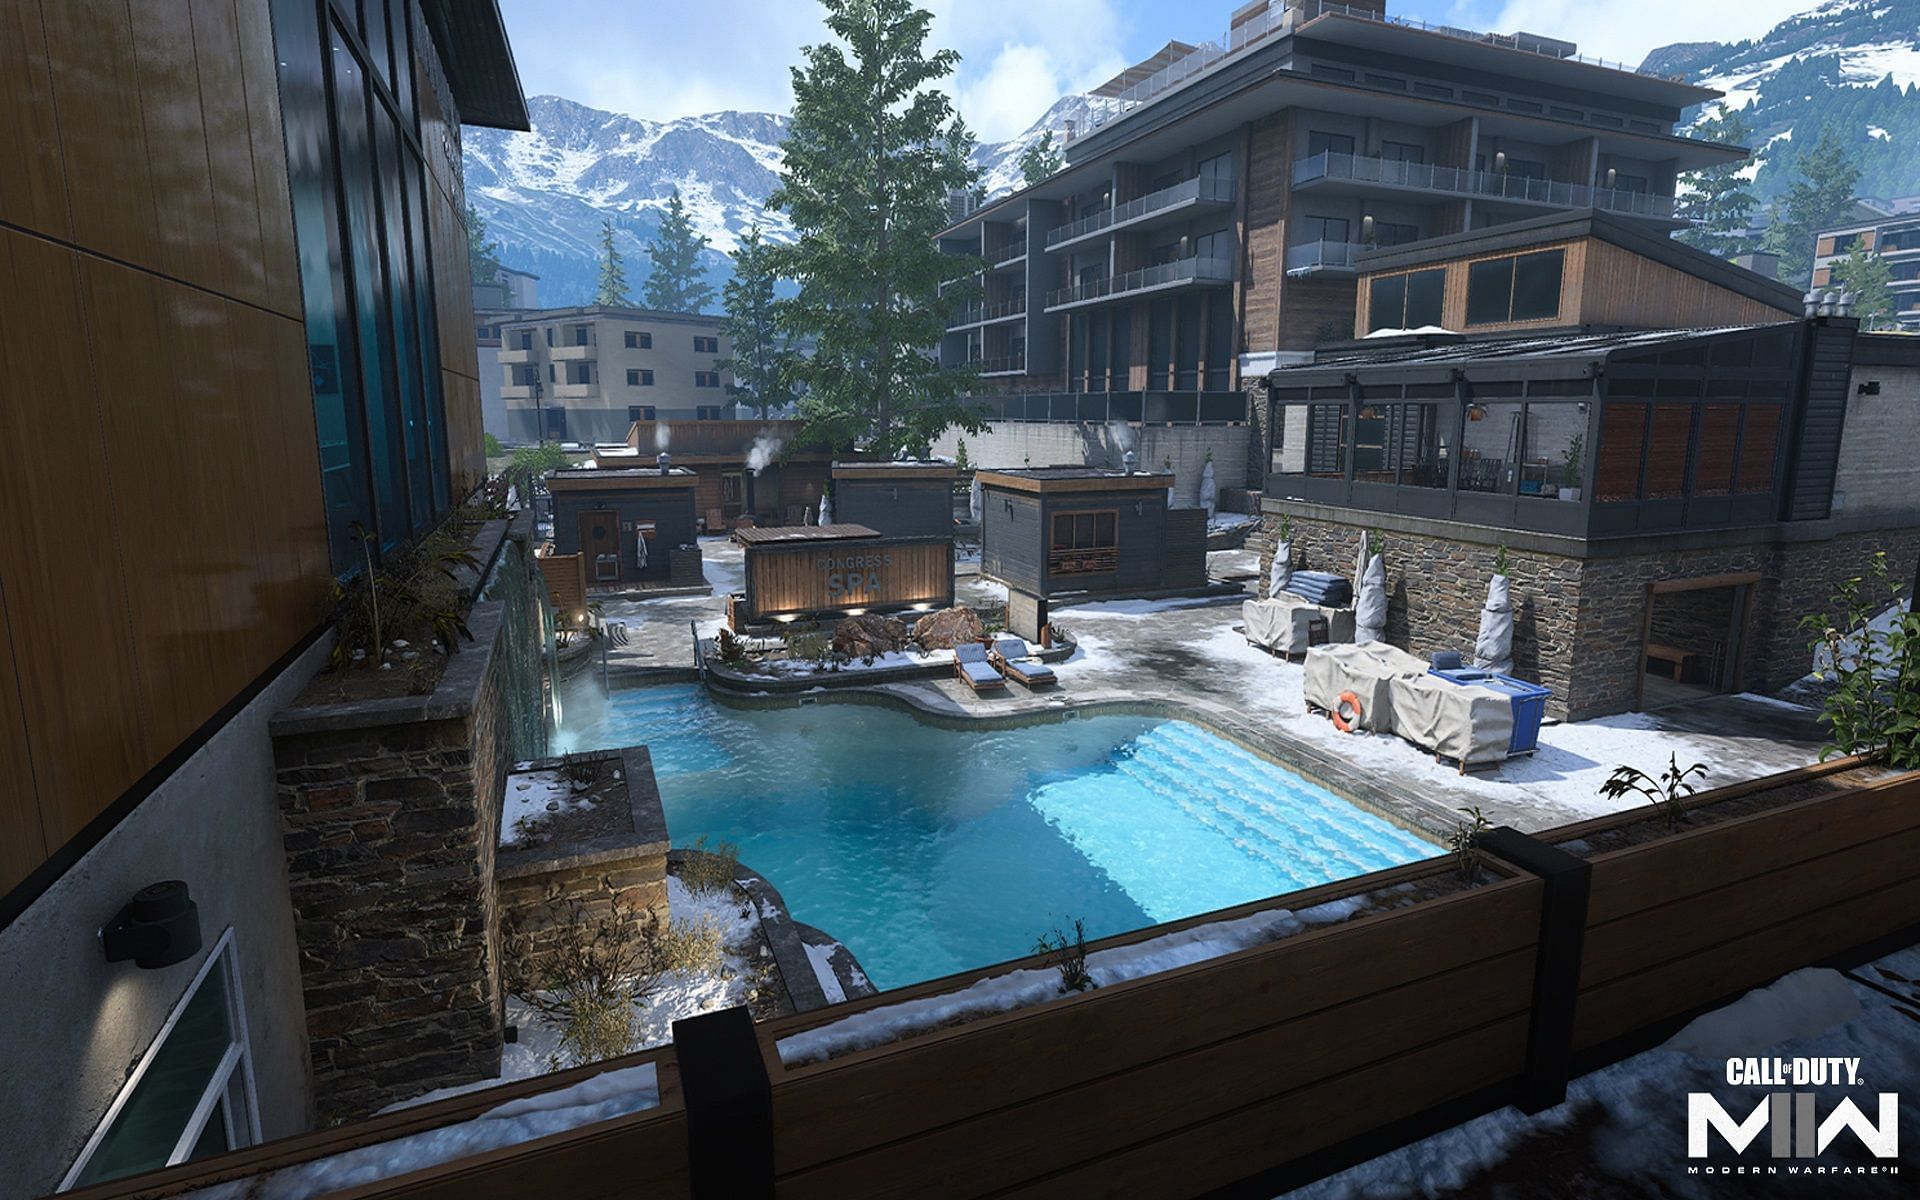 New core map will arrive in Modern Warfare 2 with Season 2 Reloaded (Image via Activision)